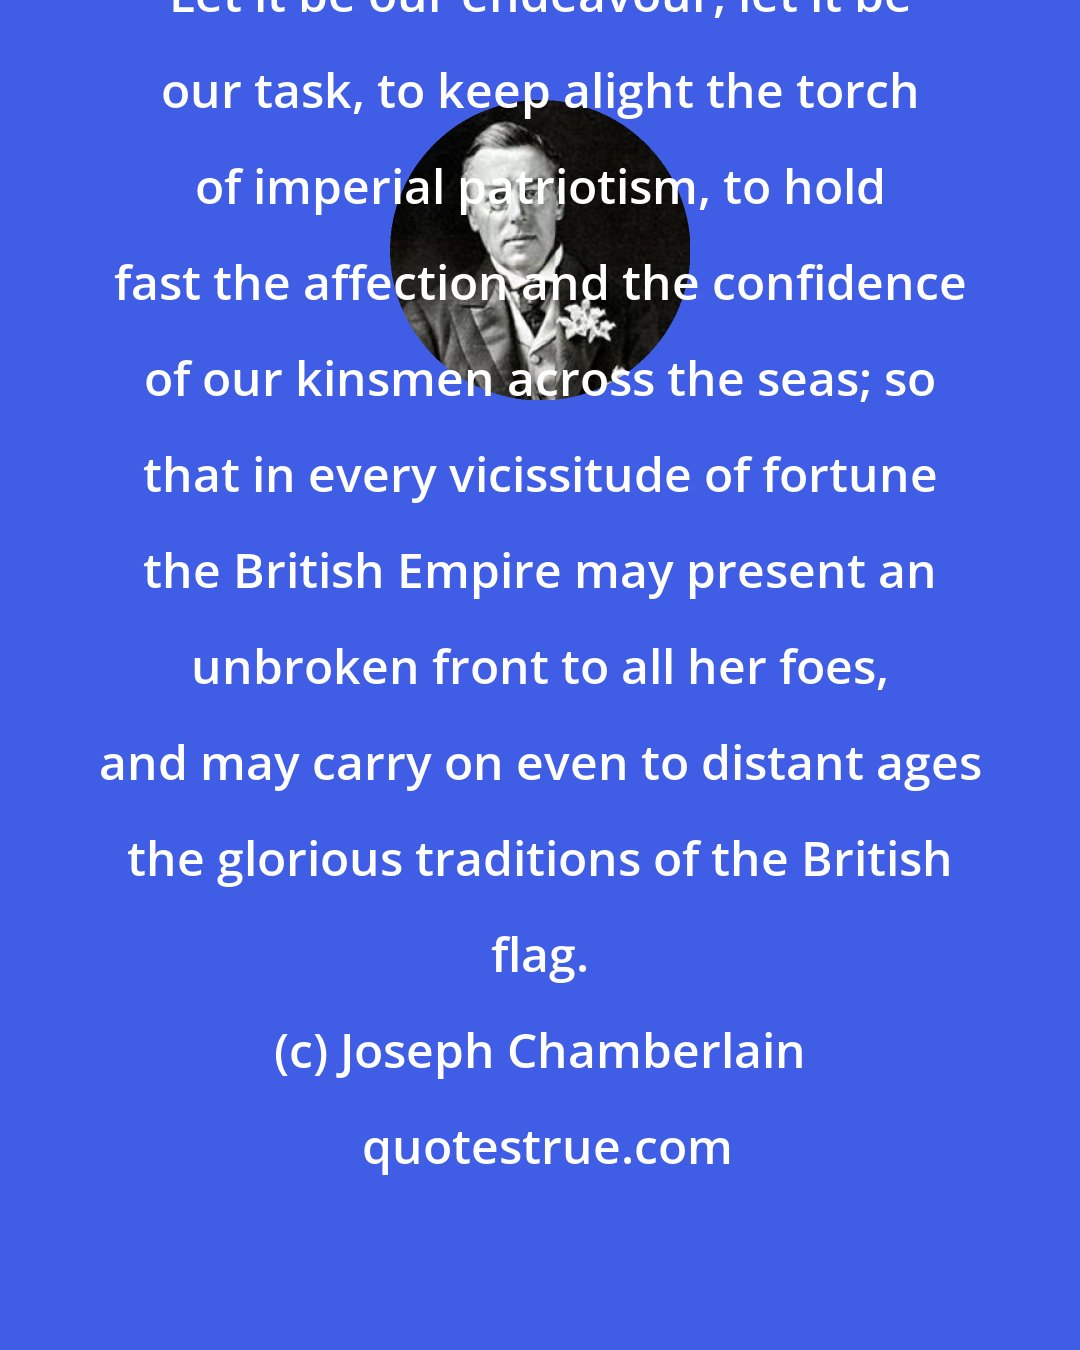 Joseph Chamberlain: Let it be our endeavour, let it be our task, to keep alight the torch of imperial patriotism, to hold fast the affection and the confidence of our kinsmen across the seas; so that in every vicissitude of fortune the British Empire may present an unbroken front to all her foes, and may carry on even to distant ages the glorious traditions of the British flag.